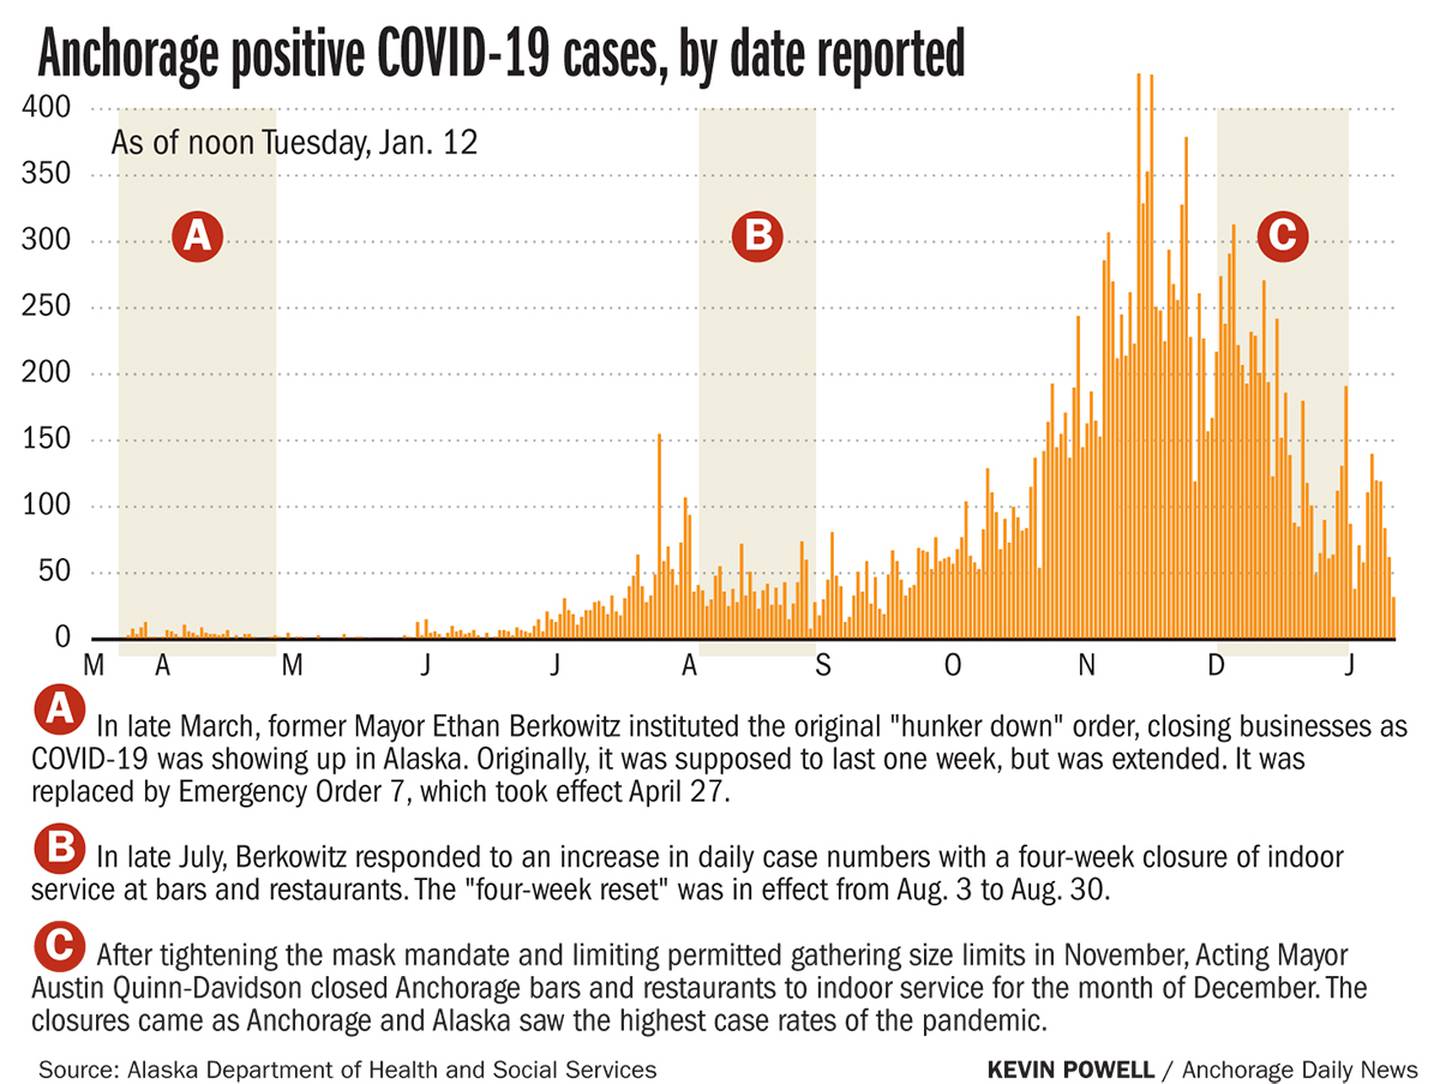 COVID-19 cases in Anchorage